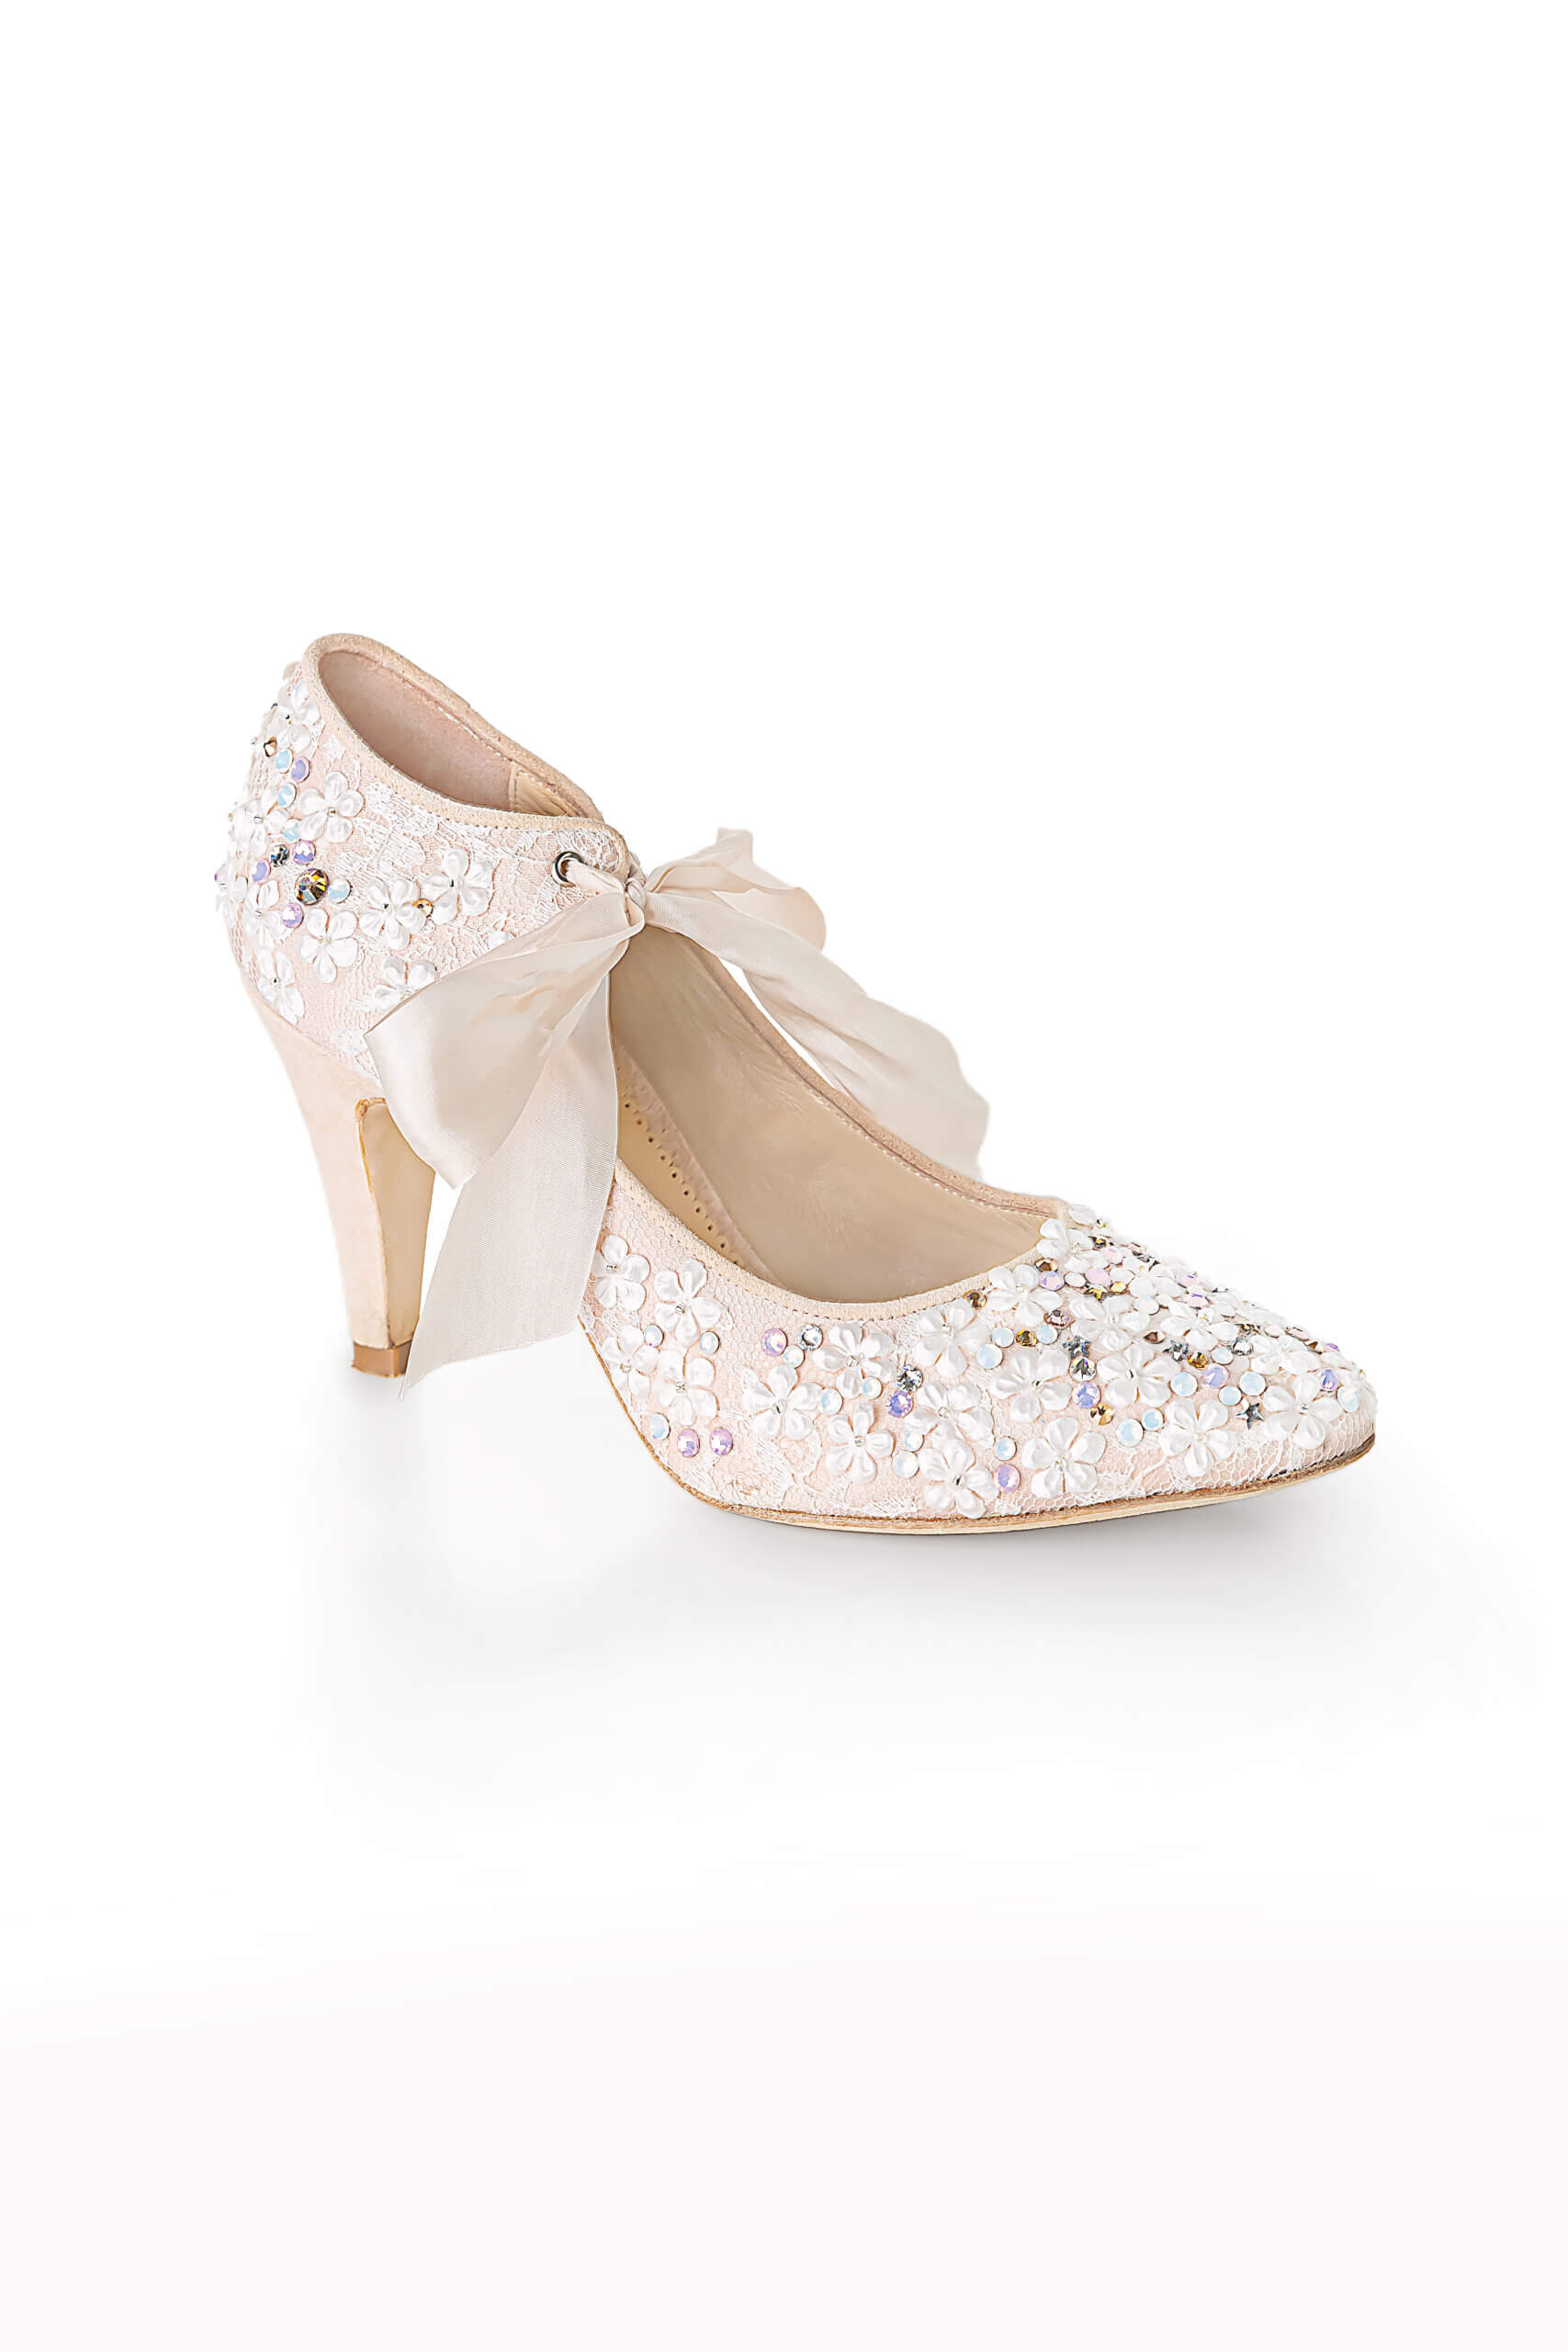 Dottie D Blossom embellished bridal mary janes. Wedding shoes handmade by Di Hassall.